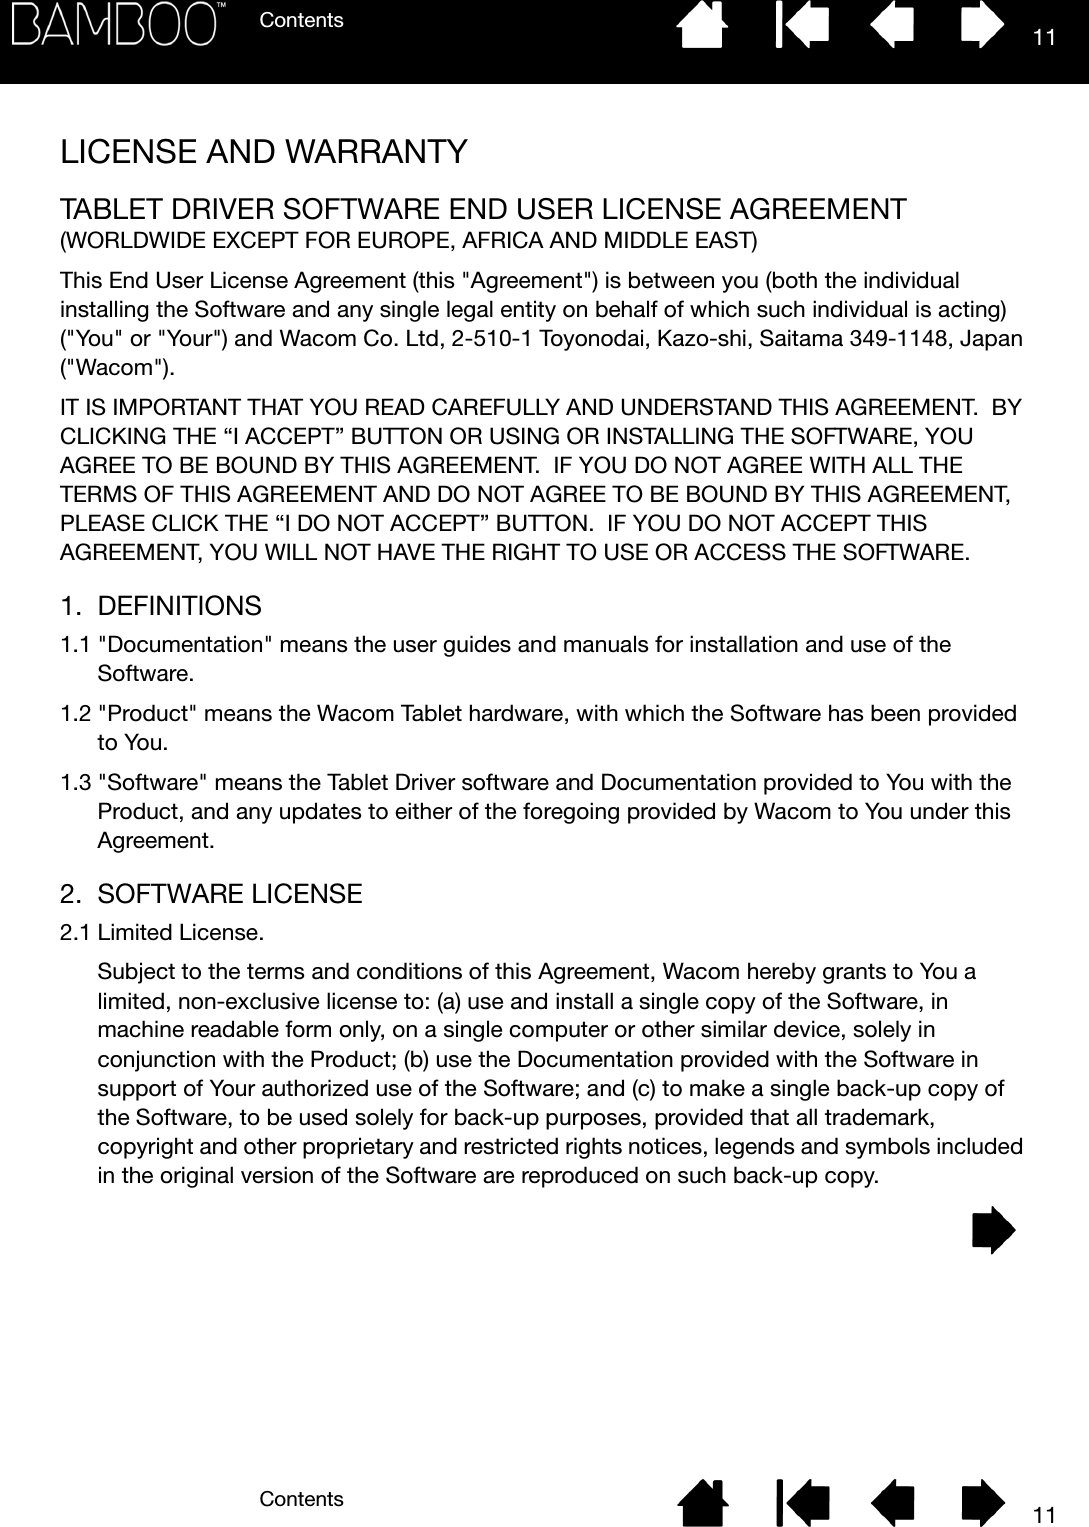 ContentsContents 1111LICENSE AND WARRANTYTABLET DRIVER SOFTWARE END USER LICENSE AGREEMENT(WORLDWIDE EXCEPT FOR EUROPE, AFRICA AND MIDDLE EAST)This End User License Agreement (this &quot;Agreement&quot;) is between you (both the individual installing the Software and any single legal entity on behalf of which such individual is acting) (&quot;You&quot; or &quot;Your&quot;) and Wacom Co. Ltd, 2-510-1 Toyonodai, Kazo-shi, Saitama 349-1148, Japan (&quot;Wacom&quot;).IT IS IMPORTANT THAT YOU READ CAREFULLY AND UNDERSTAND THIS AGREEMENT.  BY CLICKING THE “I ACCEPT” BUTTON OR USING OR INSTALLING THE SOFTWARE, YOU AGREE TO BE BOUND BY THIS AGREEMENT.  IF YOU DO NOT AGREE WITH ALL THE TERMS OF THIS AGREEMENT AND DO NOT AGREE TO BE BOUND BY THIS AGREEMENT, PLEASE CLICK THE “I DO NOT ACCEPT” BUTTON.  IF YOU DO NOT ACCEPT THIS AGREEMENT, YOU WILL NOT HAVE THE RIGHT TO USE OR ACCESS THE SOFTWARE.1. DEFINITIONS1.1 &quot;Documentation&quot; means the user guides and manuals for installation and use of the Software.1.2 &quot;Product&quot; means the Wacom Tablet hardware, with which the Software has been provided to You.1.3 &quot;Software&quot; means the Tablet Driver software and Documentation provided to You with the Product, and any updates to either of the foregoing provided by Wacom to You under this Agreement.2. SOFTWARE LICENSE2.1 Limited License.Subject to the terms and conditions of this Agreement, Wacom hereby grants to You a limited, non-exclusive license to: (a) use and install a single copy of the Software, in machine readable form only, on a single computer or other similar device, solely in conjunction with the Product; (b) use the Documentation provided with the Software in support of Your authorized use of the Software; and (c) to make a single back-up copy of the Software, to be used solely for back-up purposes, provided that all trademark, copyright and other proprietary and restricted rights notices, legends and symbols included in the original version of the Software are reproduced on such back-up copy.